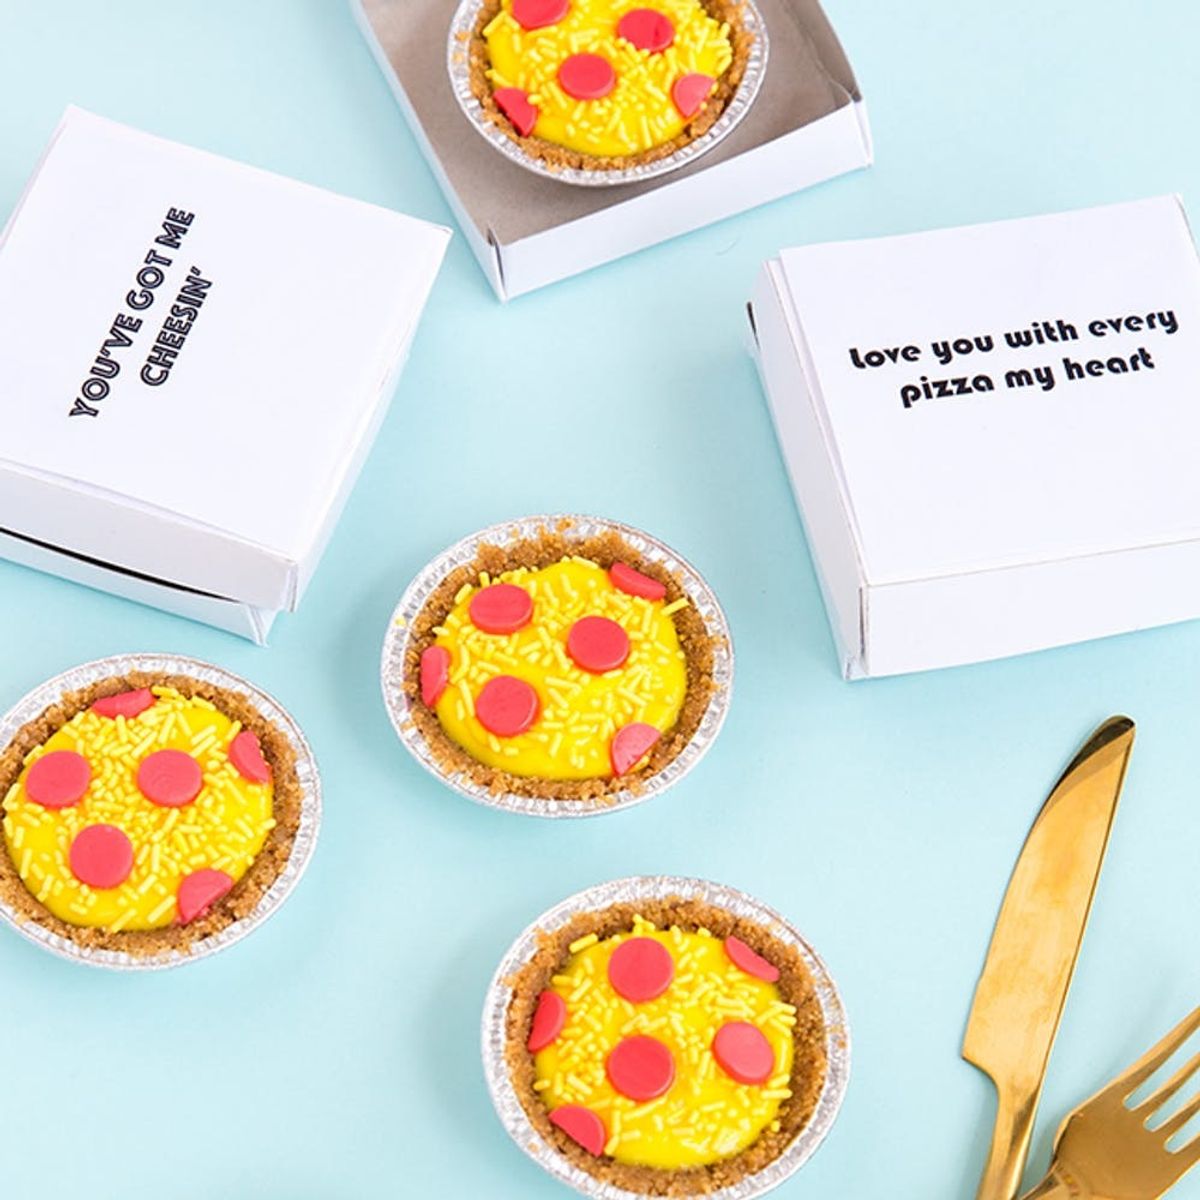 Make Dad a Mini Pizza Pie for Father’s Day